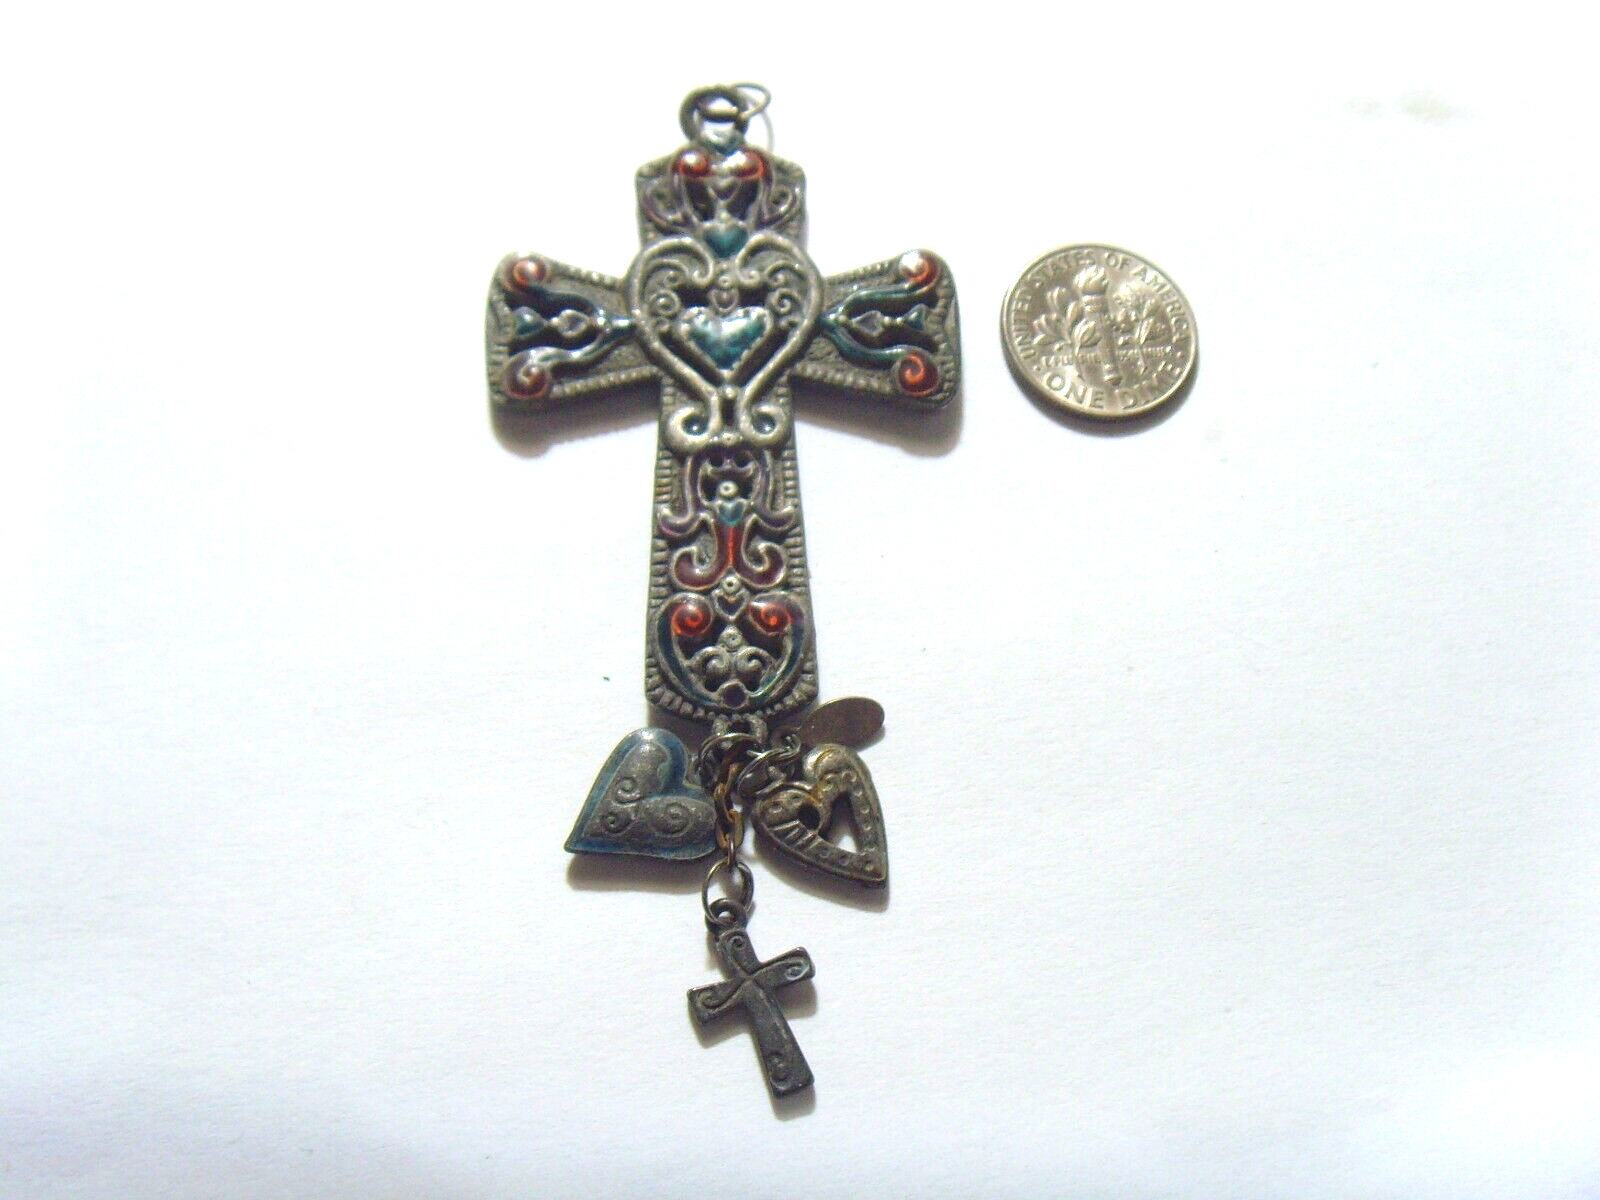 Antique unusual ornate Christian Cross pendant with religious faith charms 52300